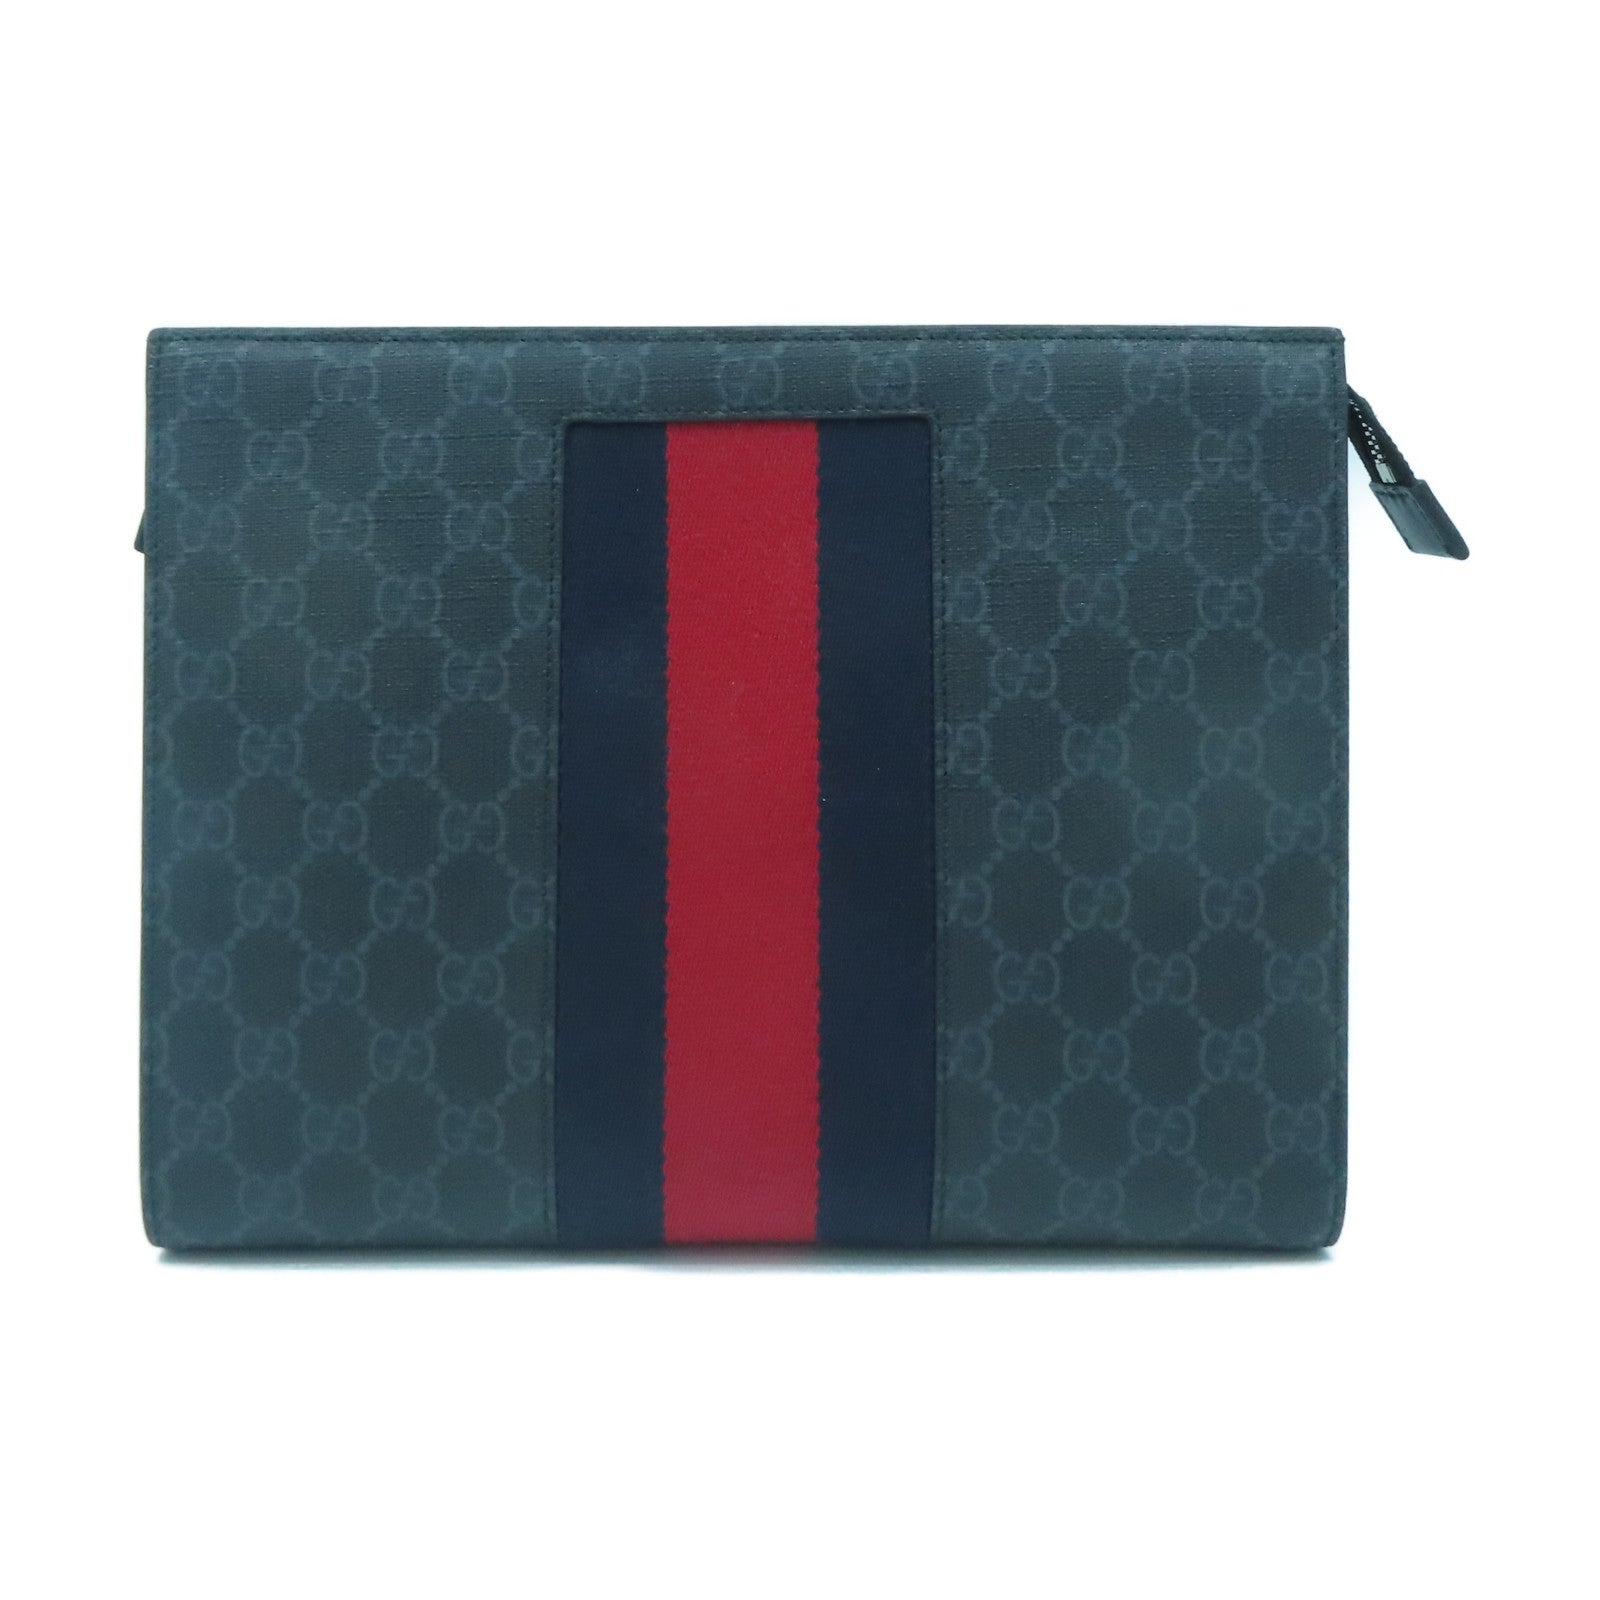 GUCCI Coated Canvas GG Supreme Silver Buckle Clutch Blue